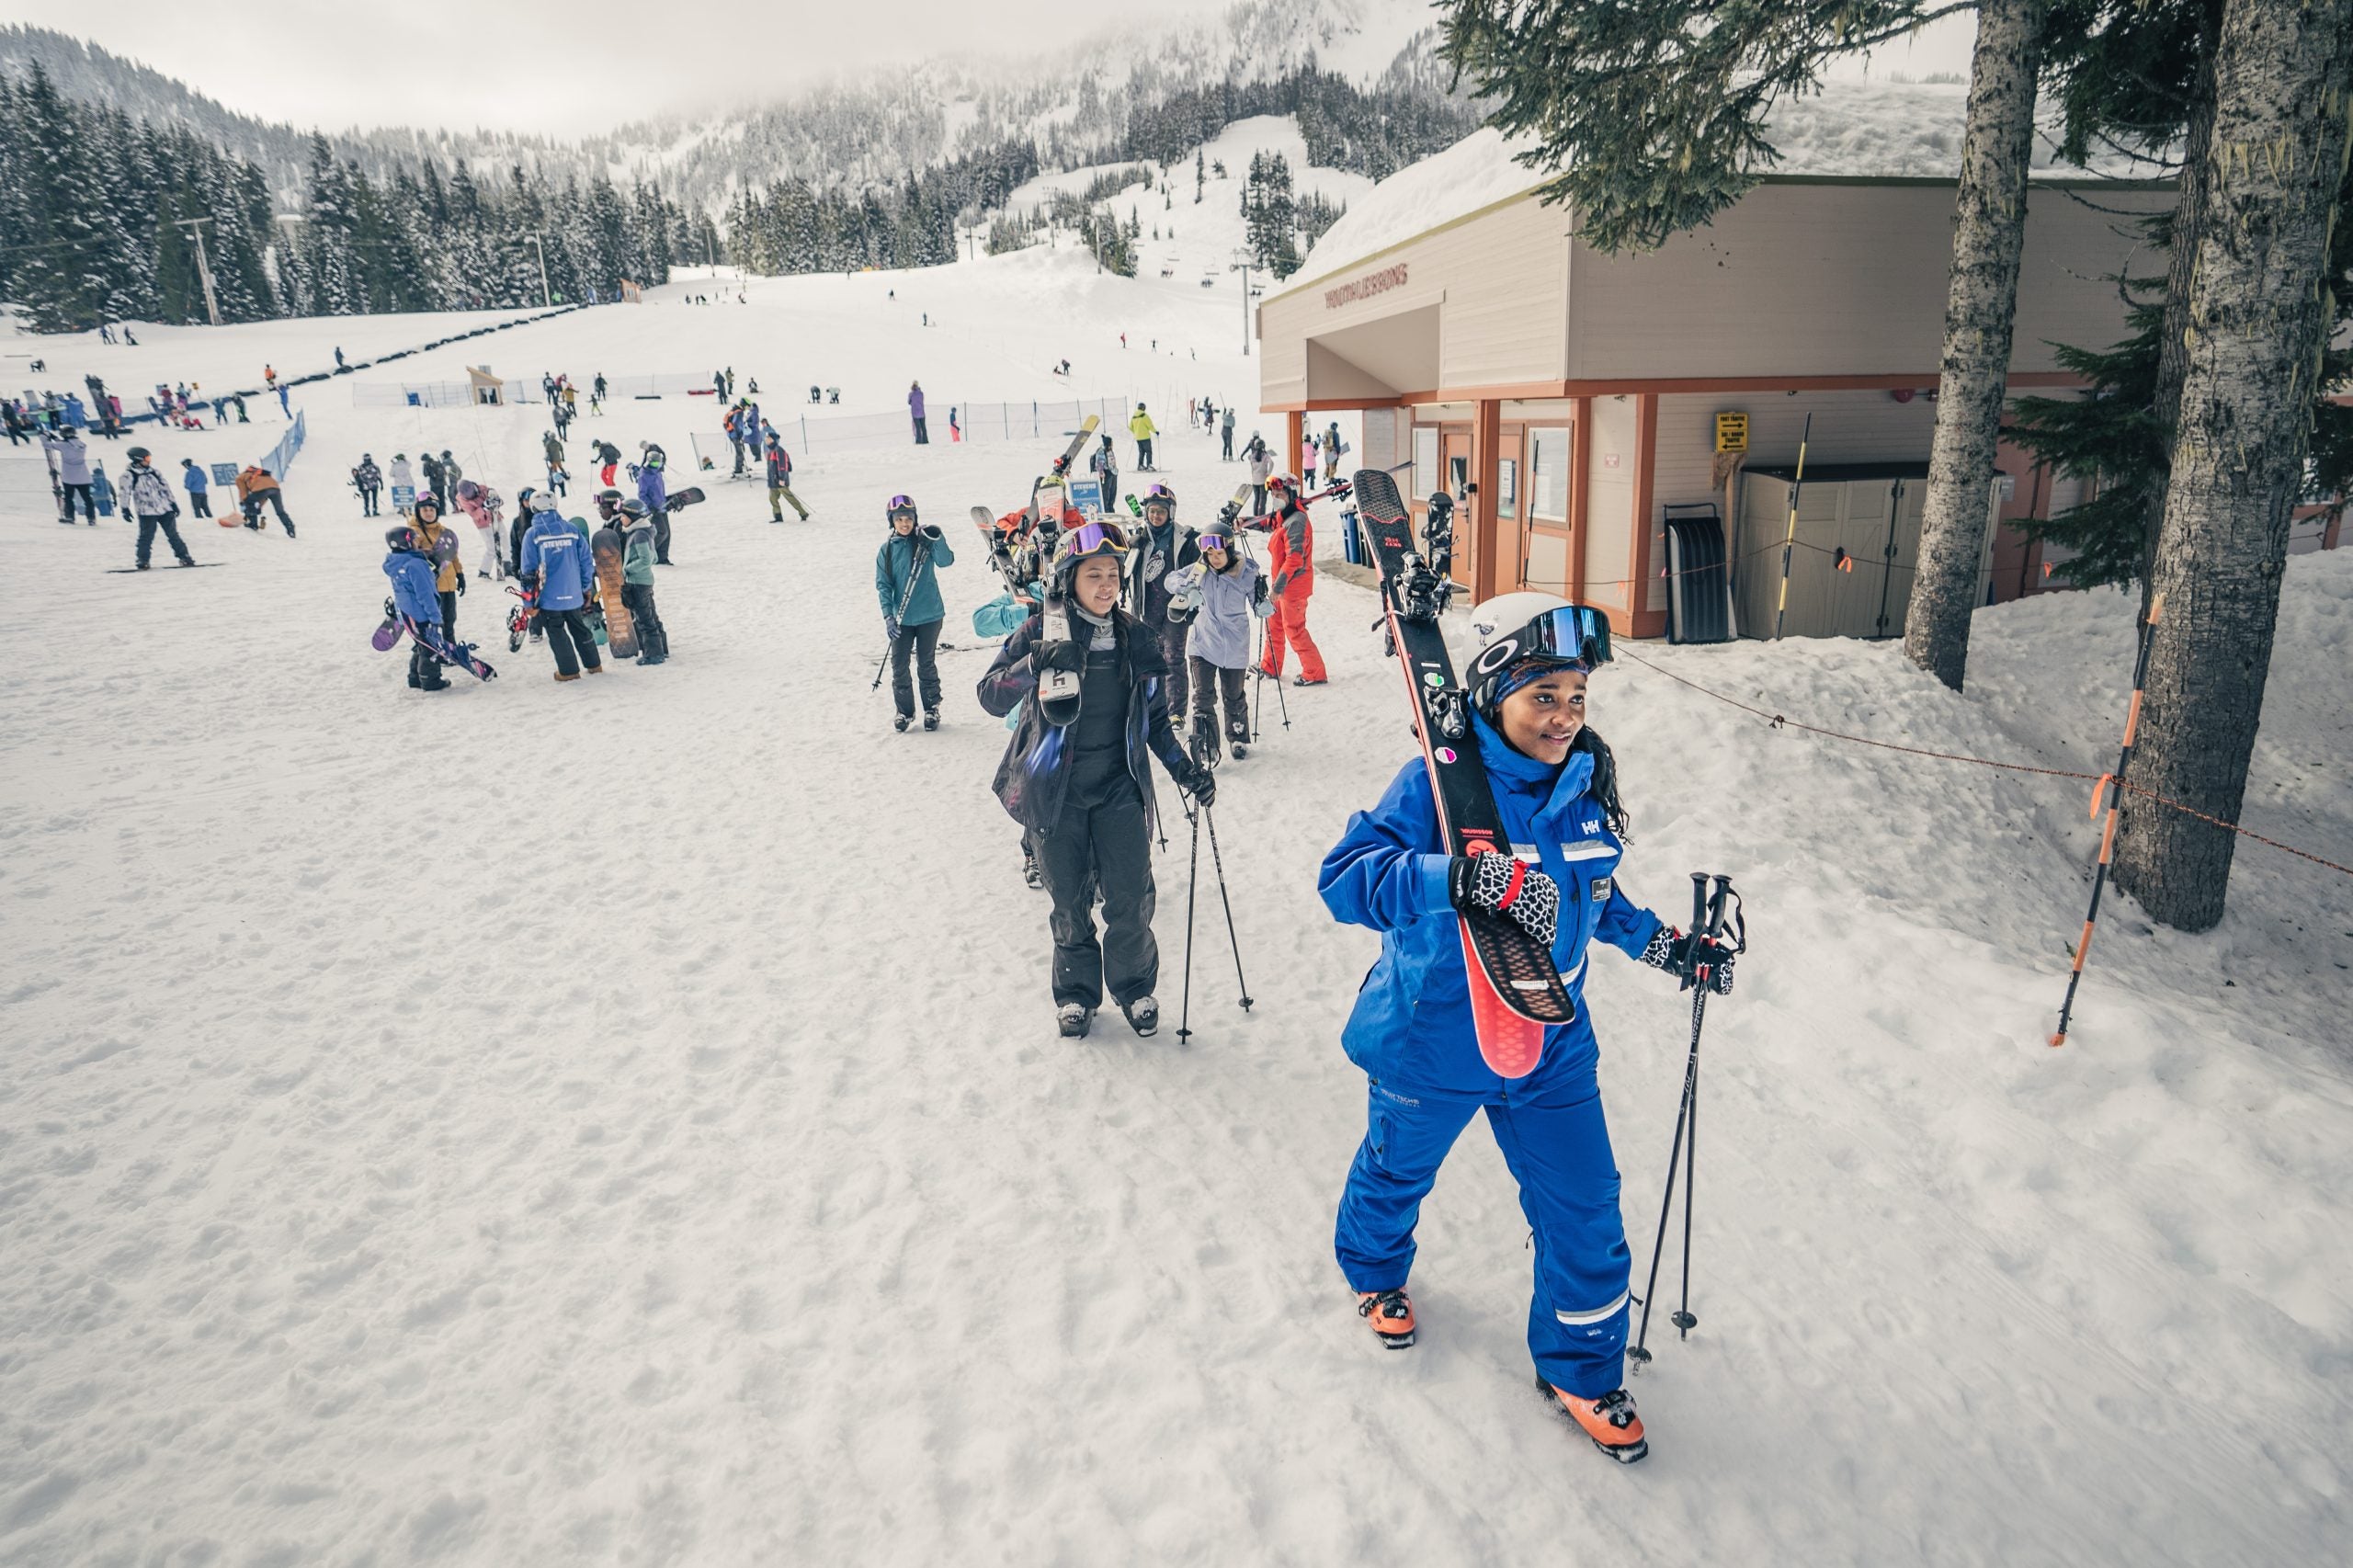 EDGE Outdoors Is Bringing Black Women To The Slopes To Diversify Snow Sports